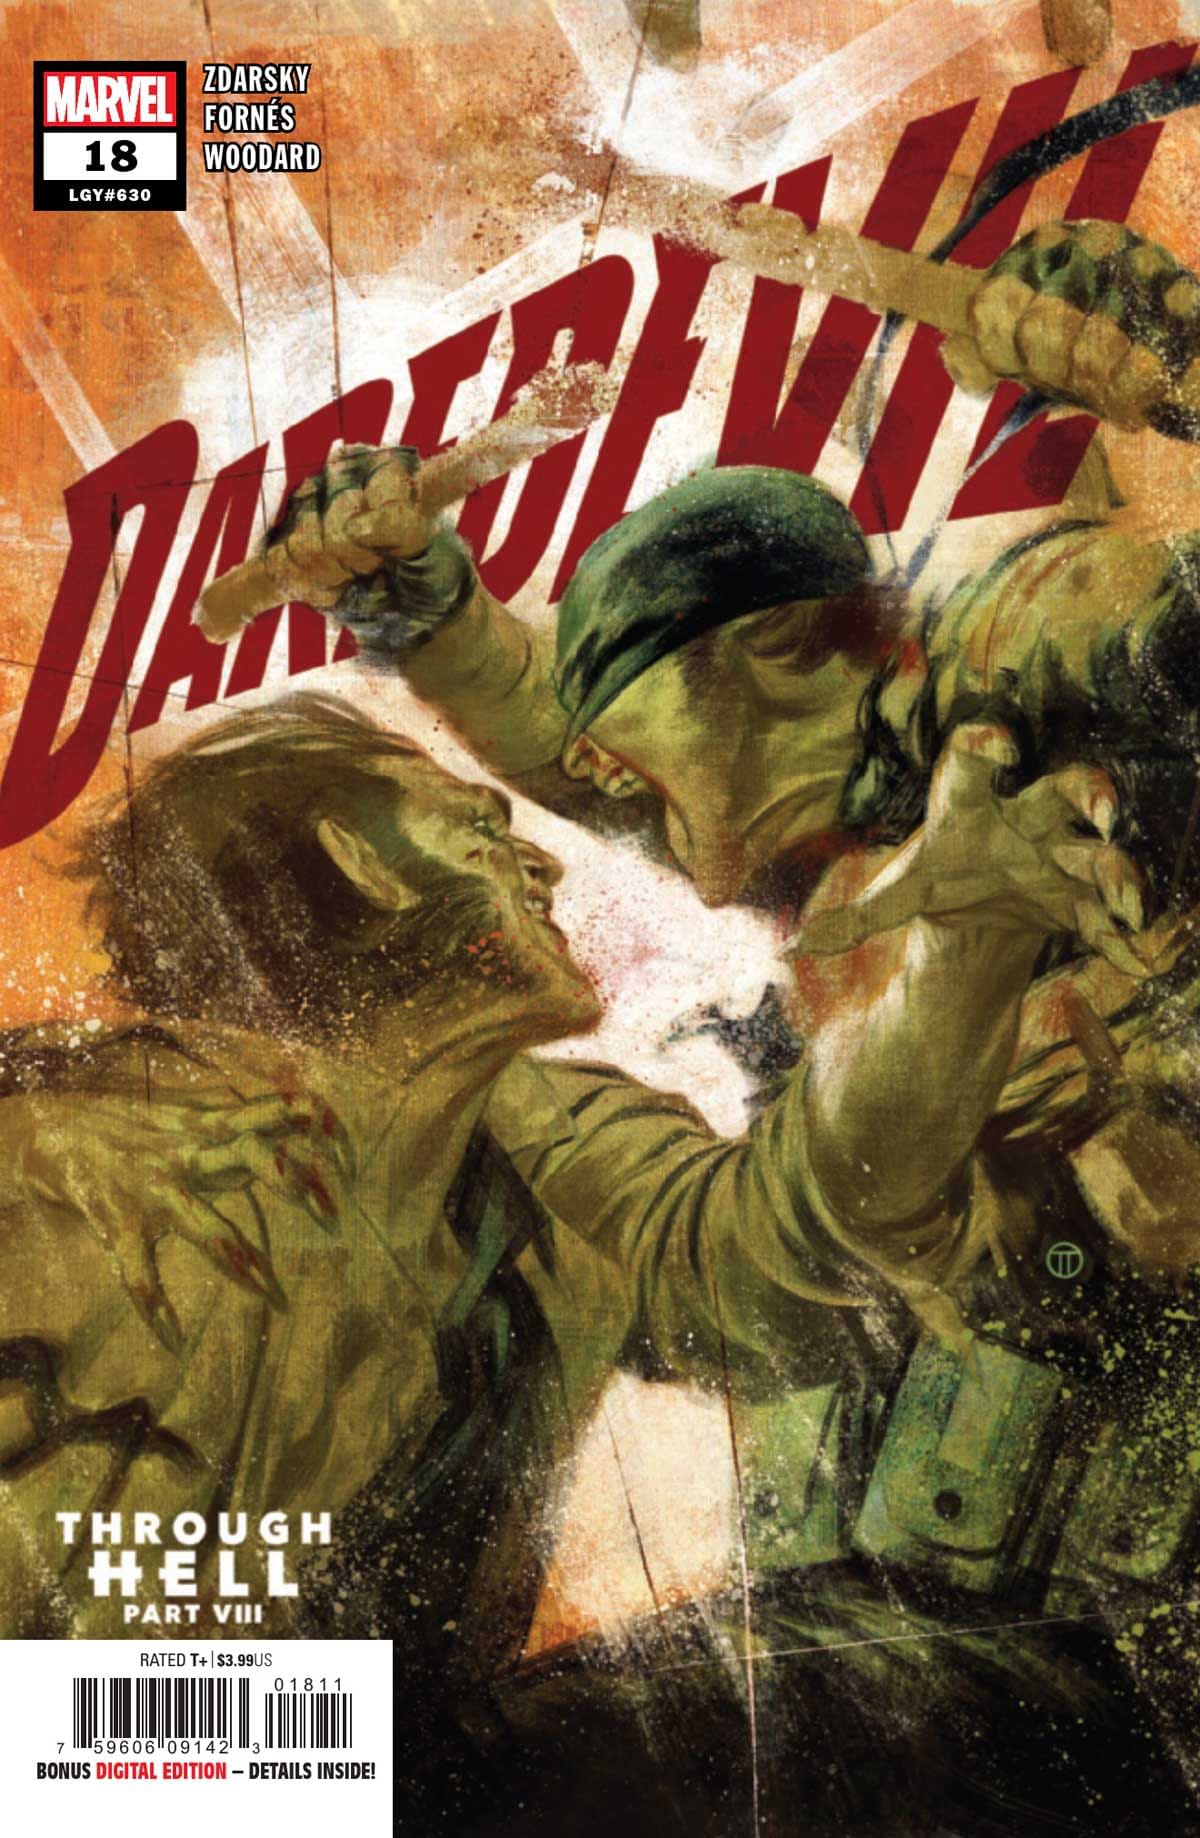 REVIEW: Daredevil #18 -- "This Issue Has One Setting: 'Holy Crap'"